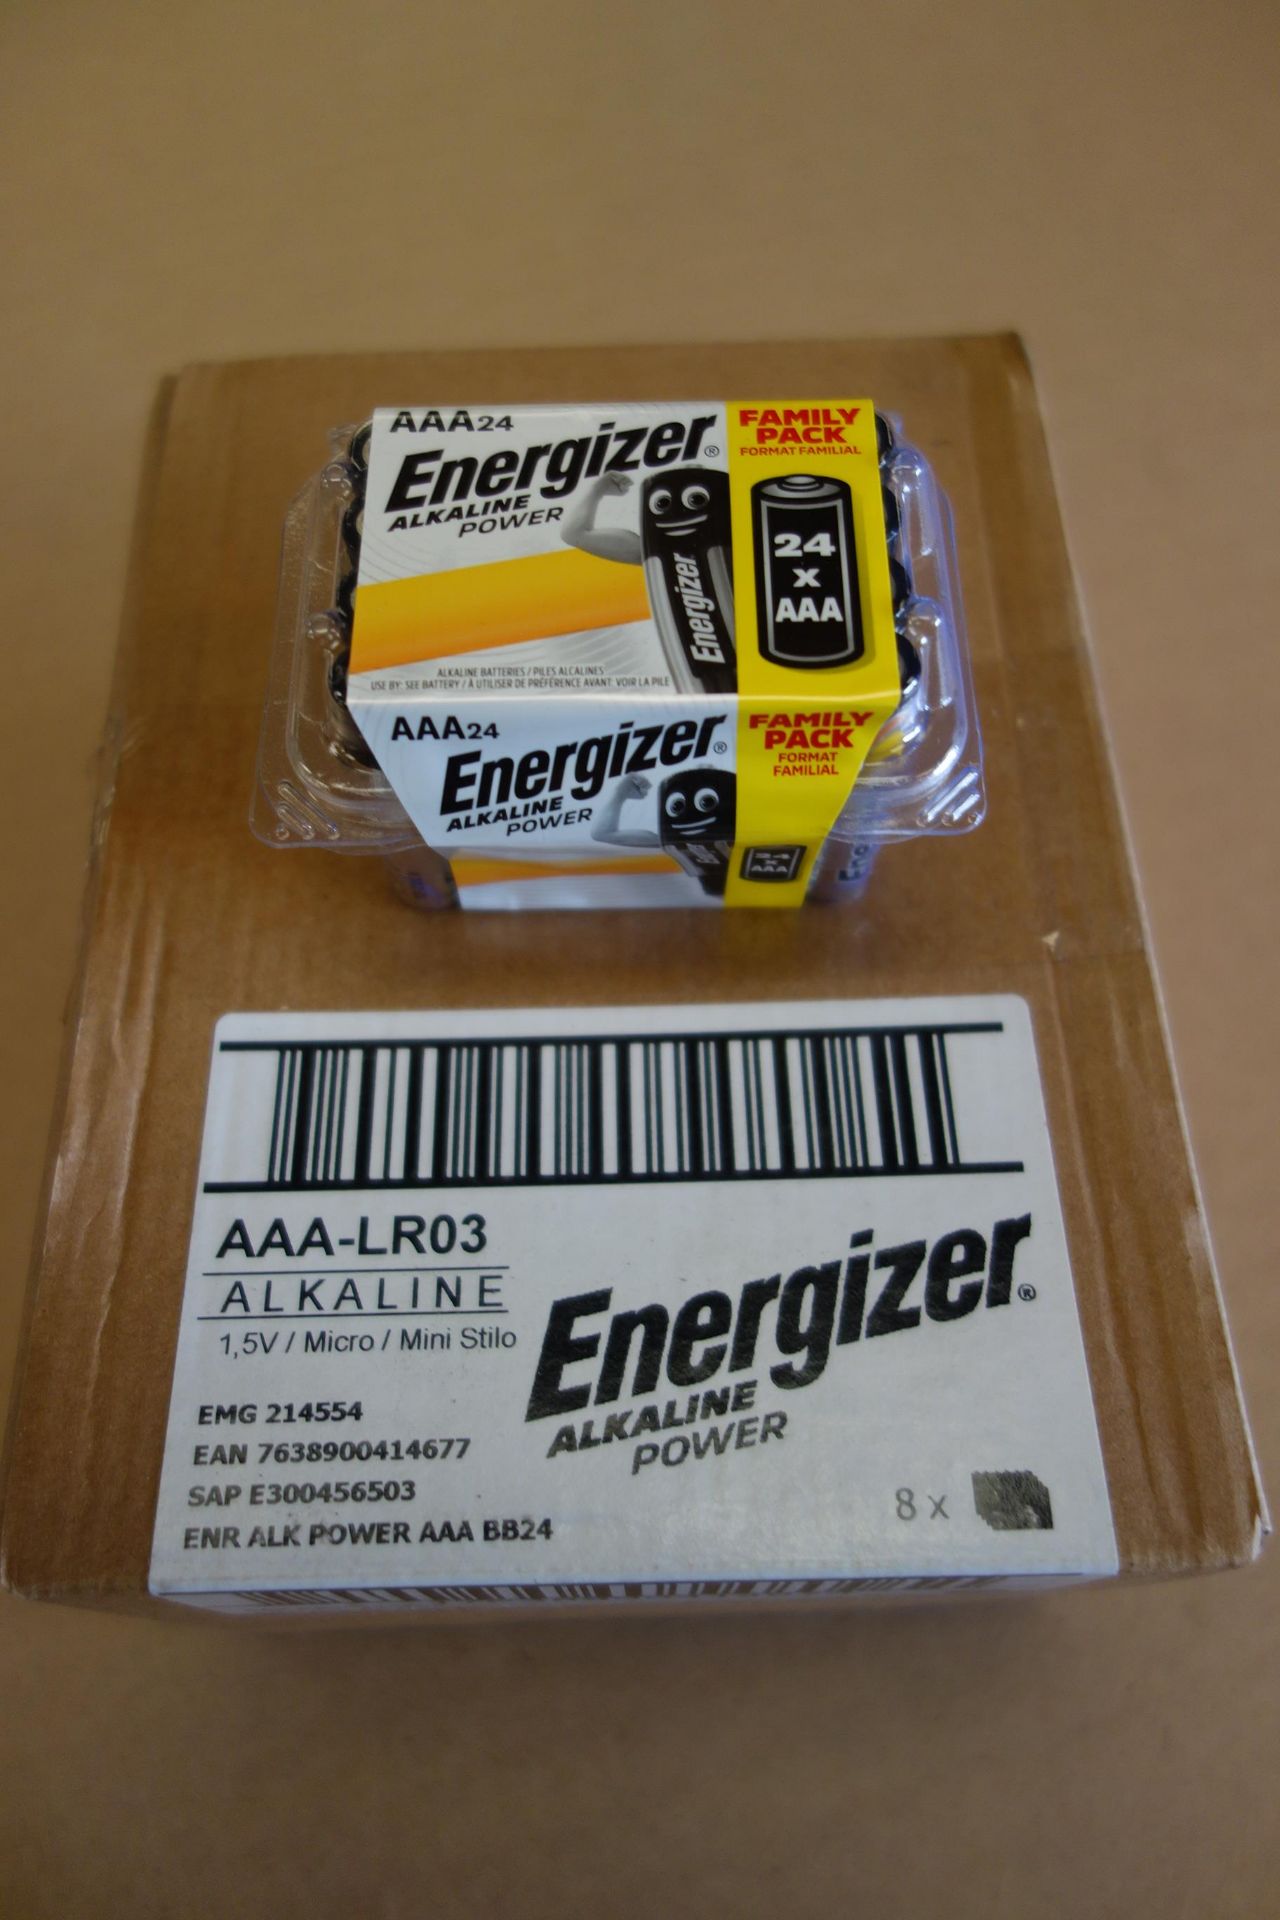 16 X Packs Of AAA-LR03 Energizer Batterys 24 X Batterys Per Pack Use By Date 12-20-29